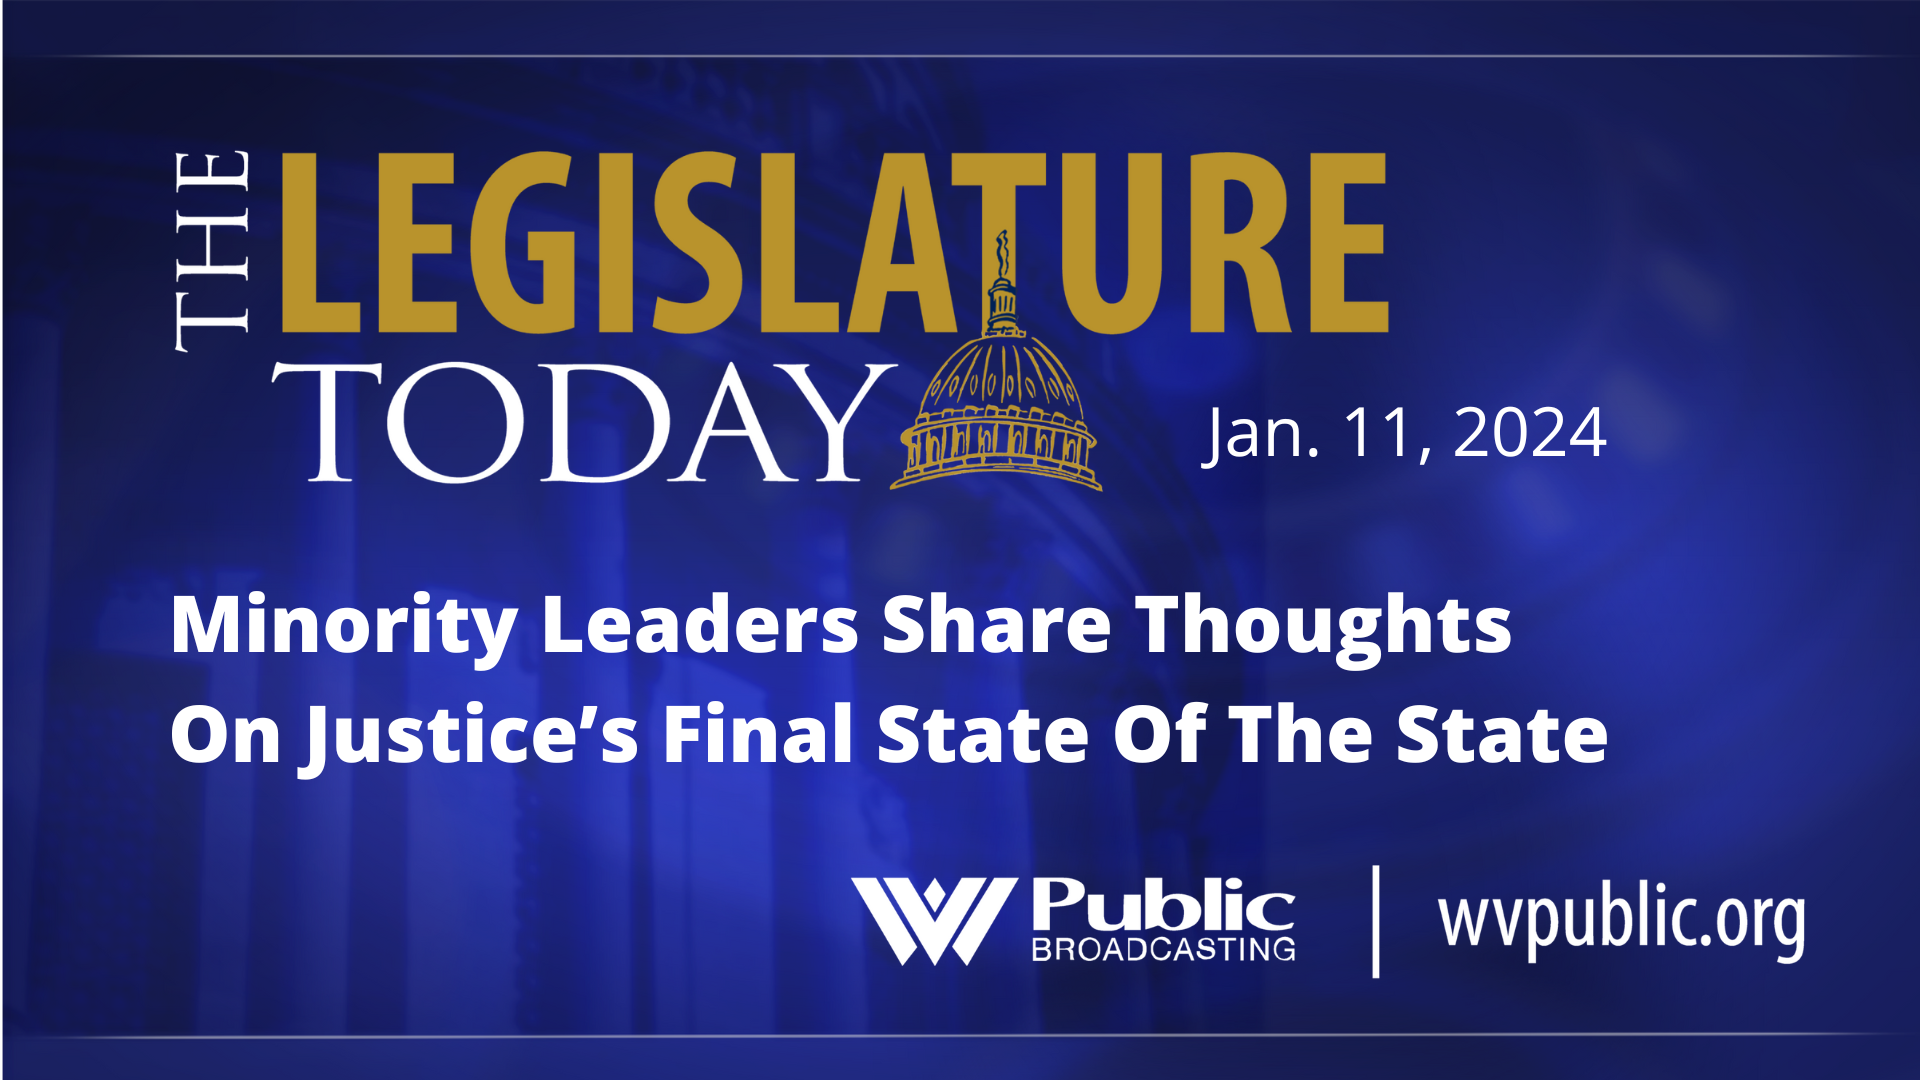 Minority Leaders Share Thoughts On Justice’s Final State Of The State